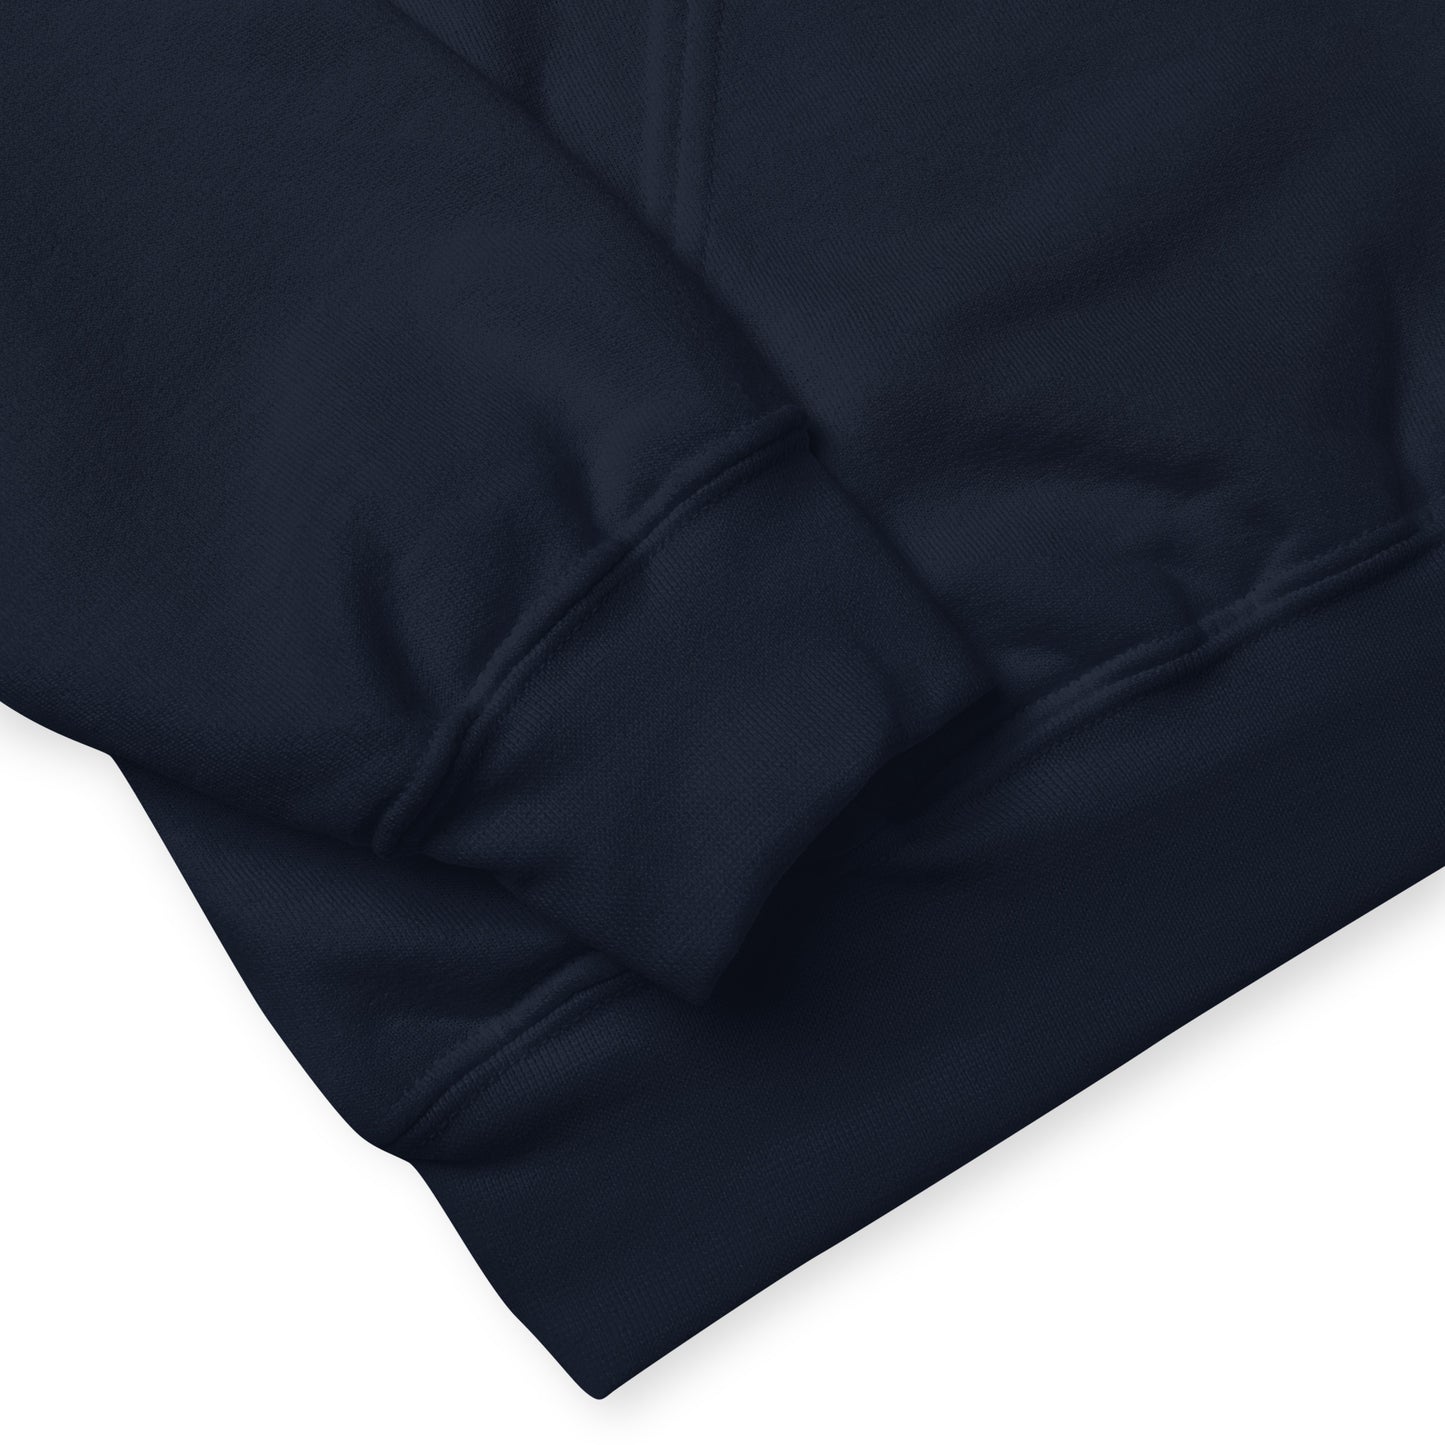 A54 Official Hoodie in Navy